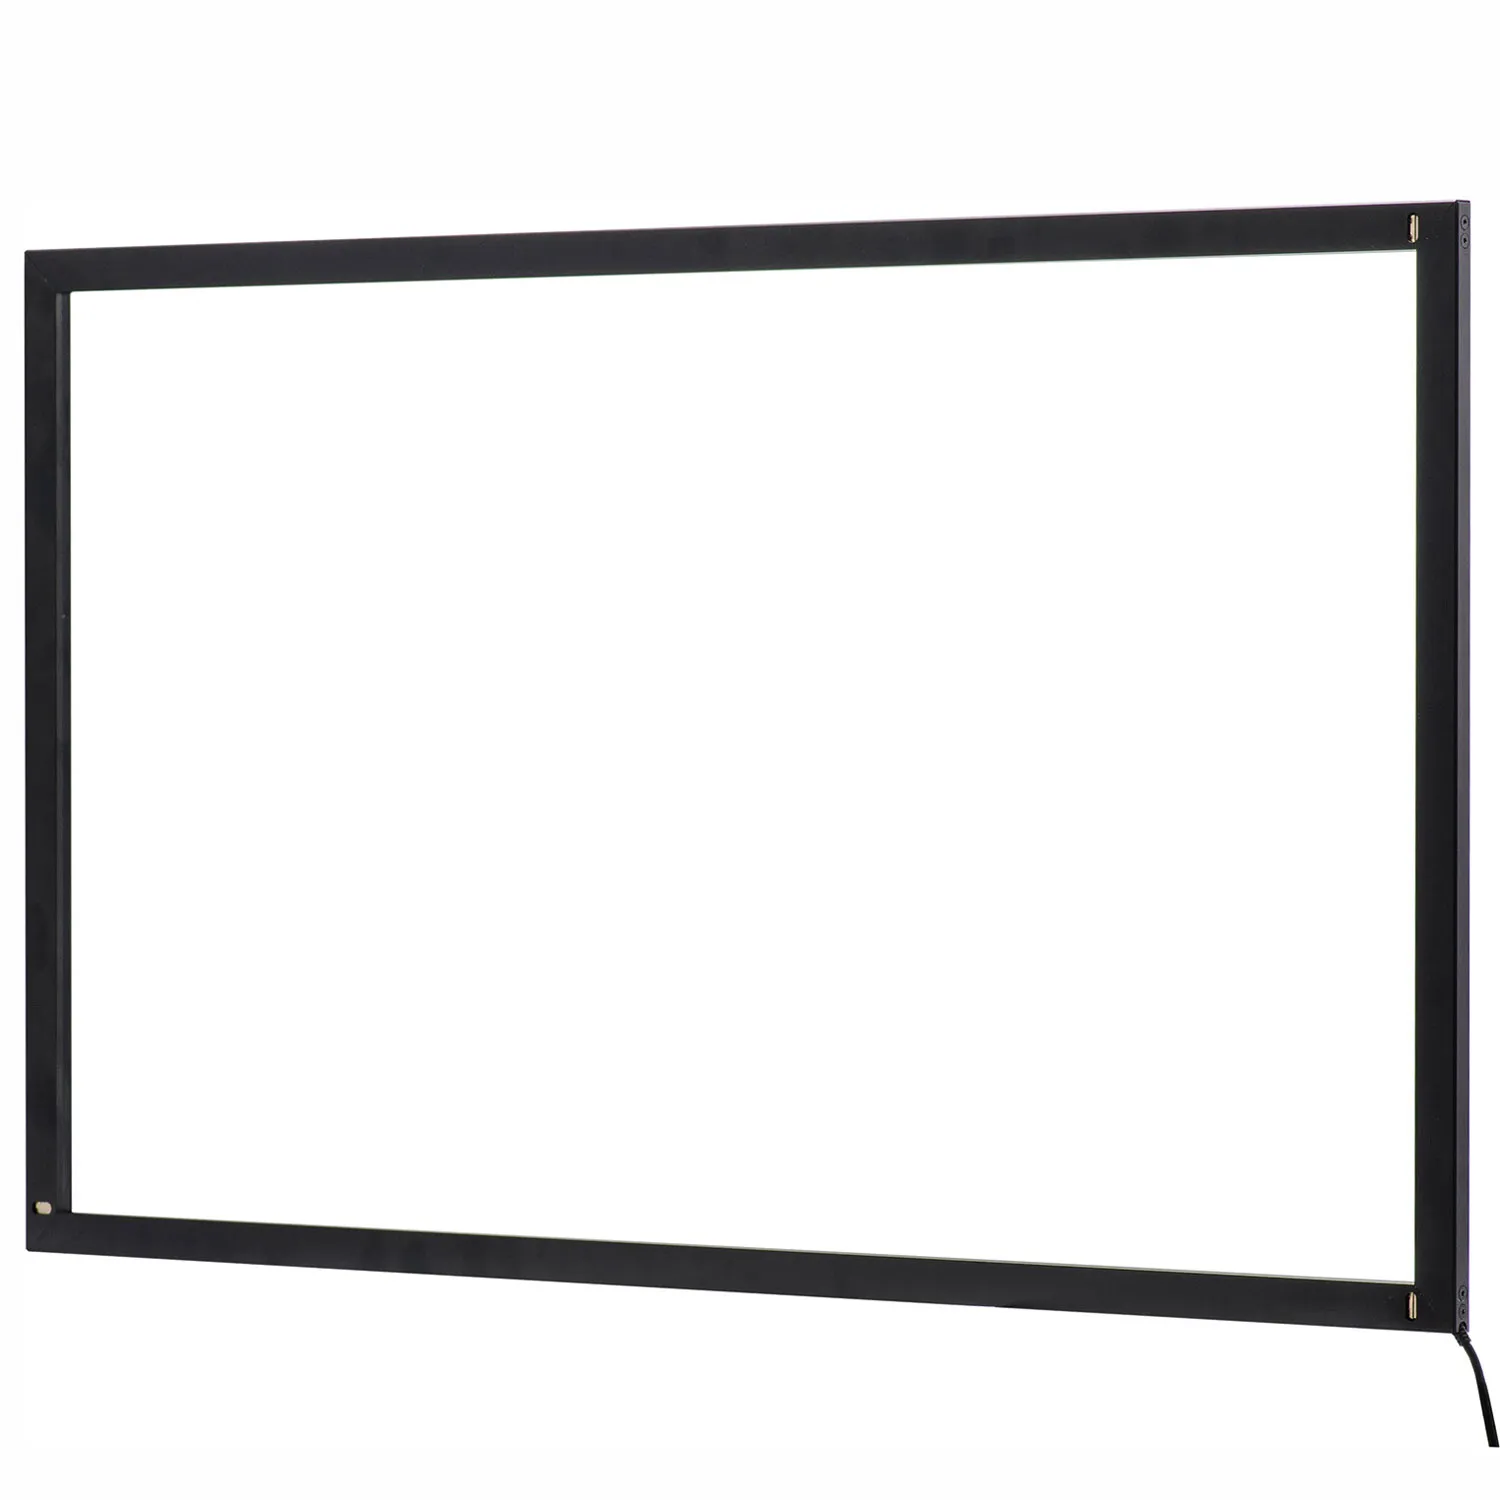 Touch Screen Keetouch GmbH 80" frame KP-800-IP2S0U1